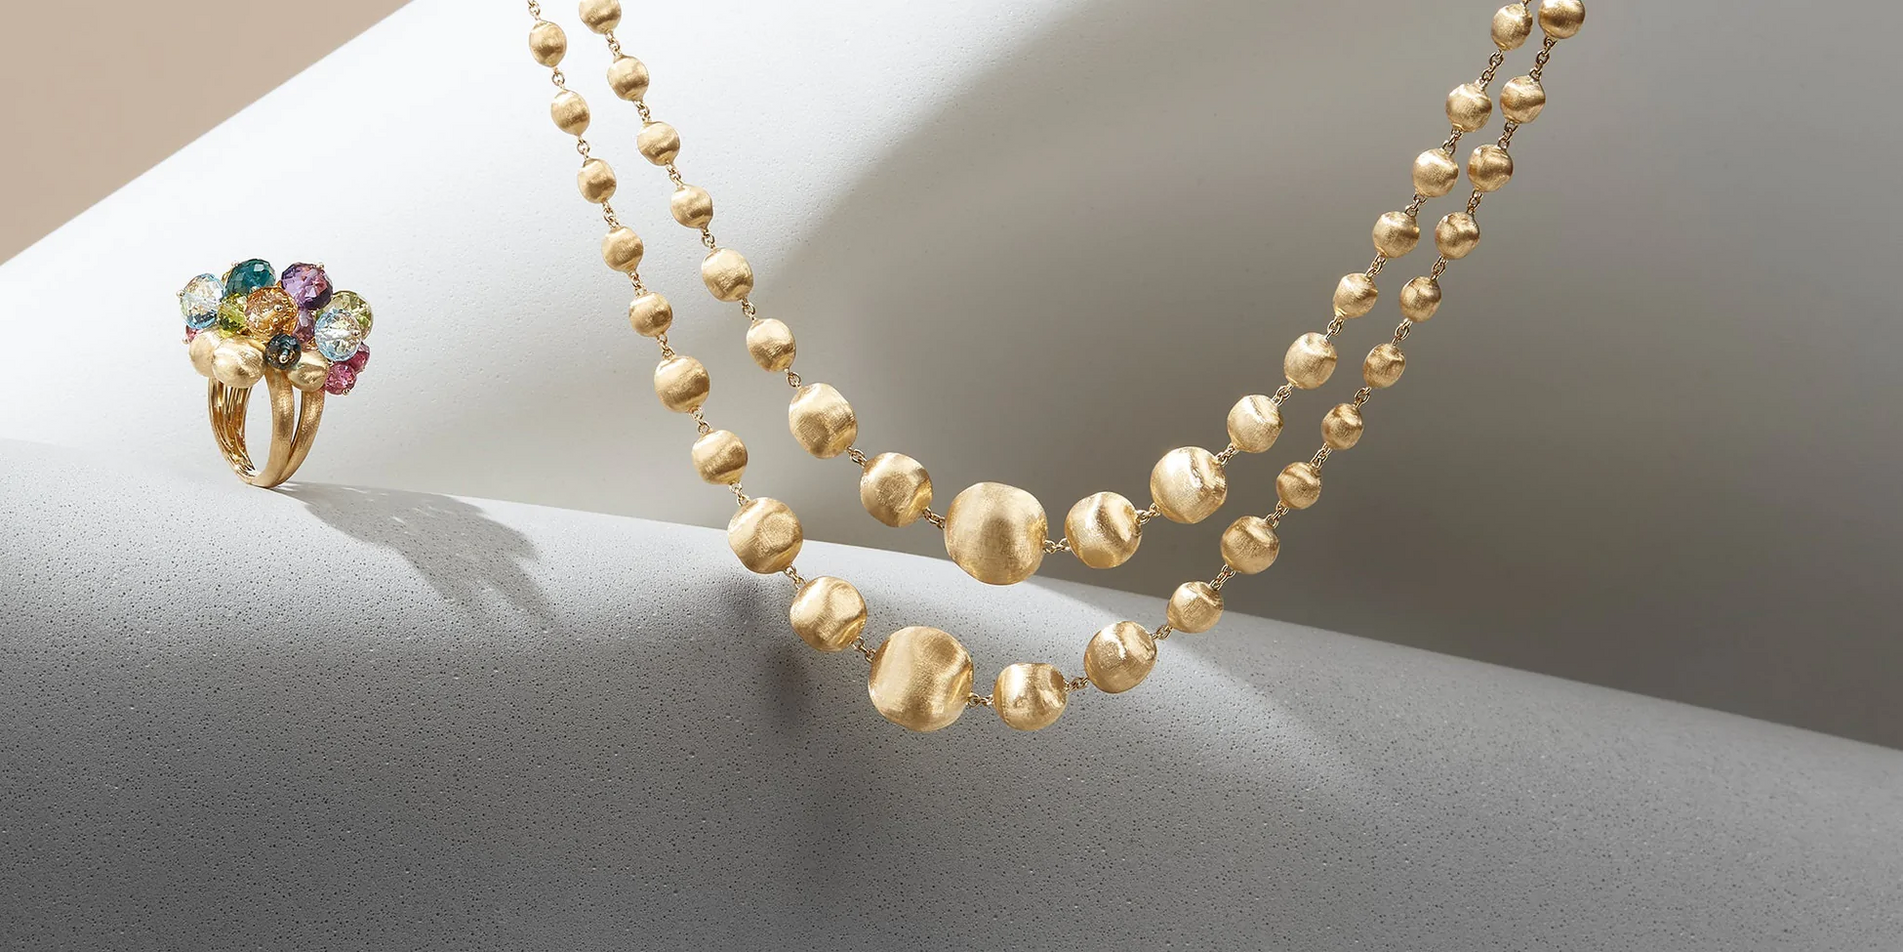 Fine Italian Jewellery From Italy made of Yellow Gold